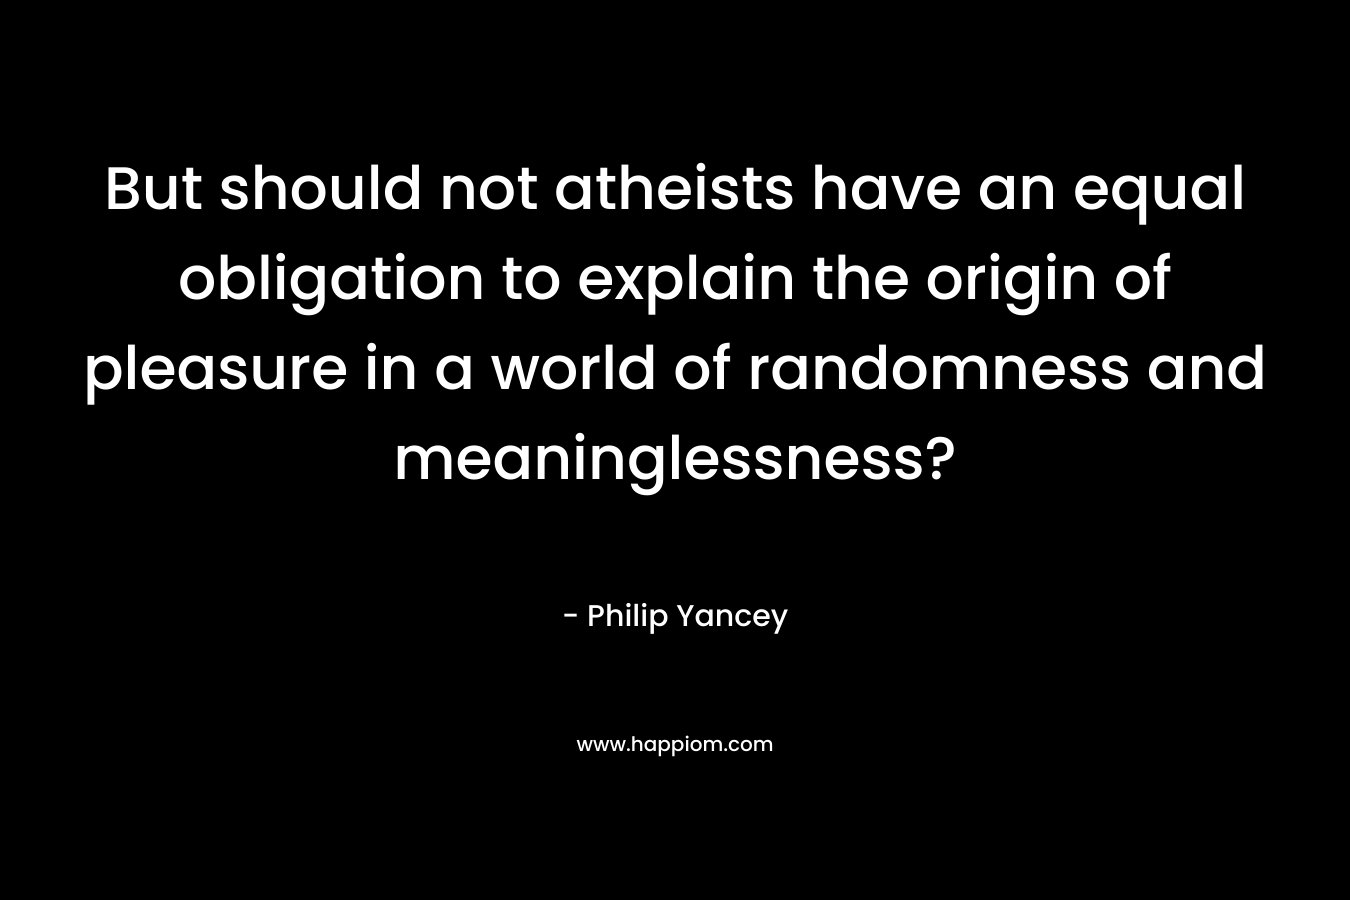 But should not atheists have an equal obligation to explain the origin of pleasure in a world of randomness and meaninglessness? – Philip Yancey